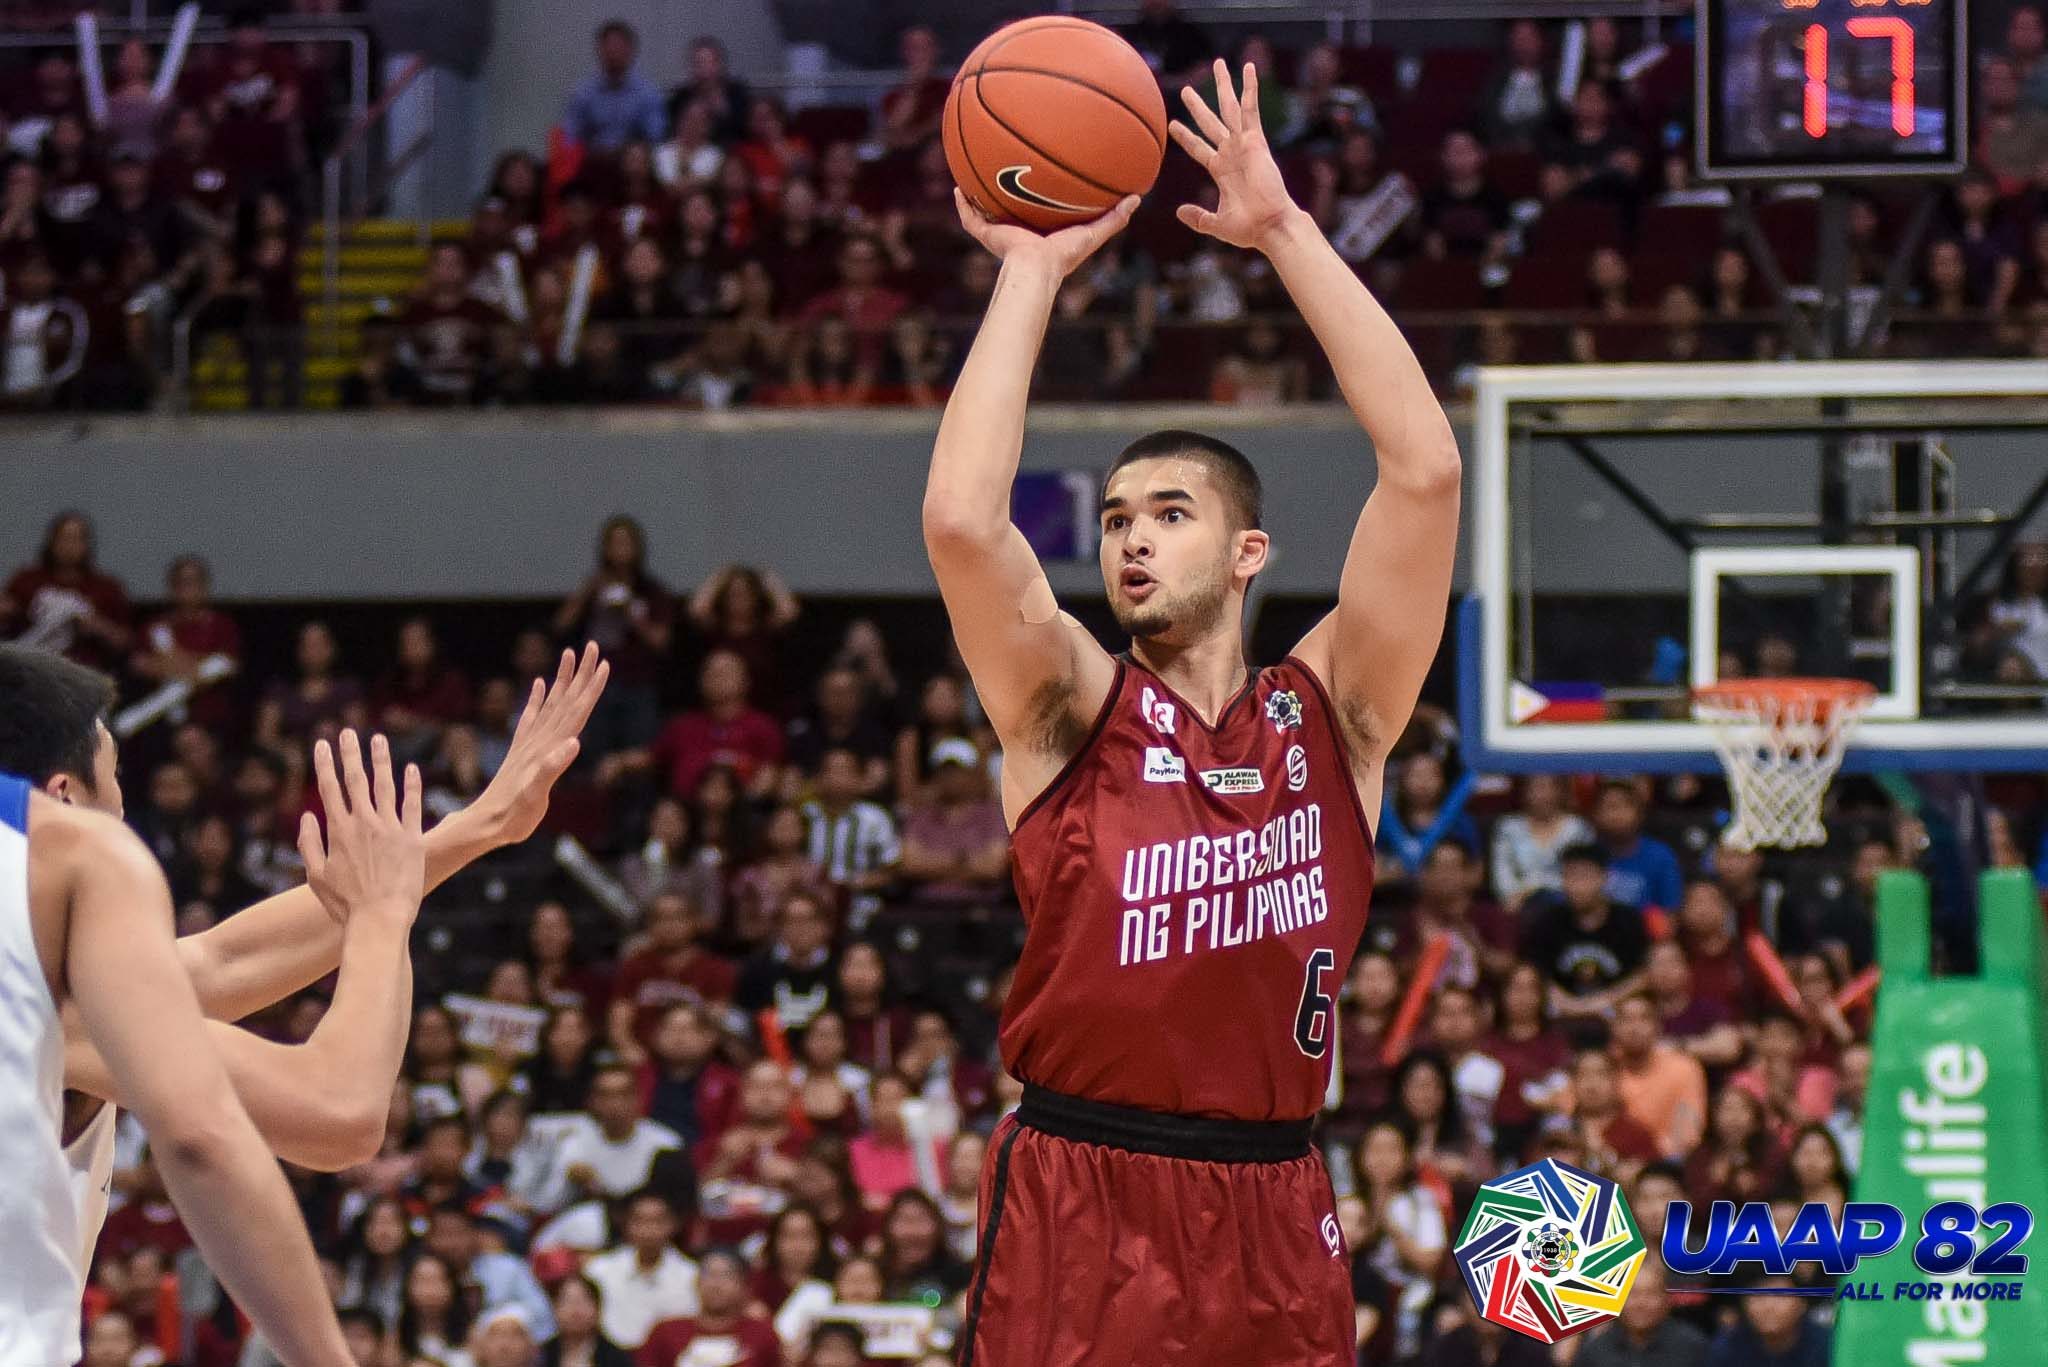 Kobe Paras pursues ‘2nd chance’ in foreign hoops